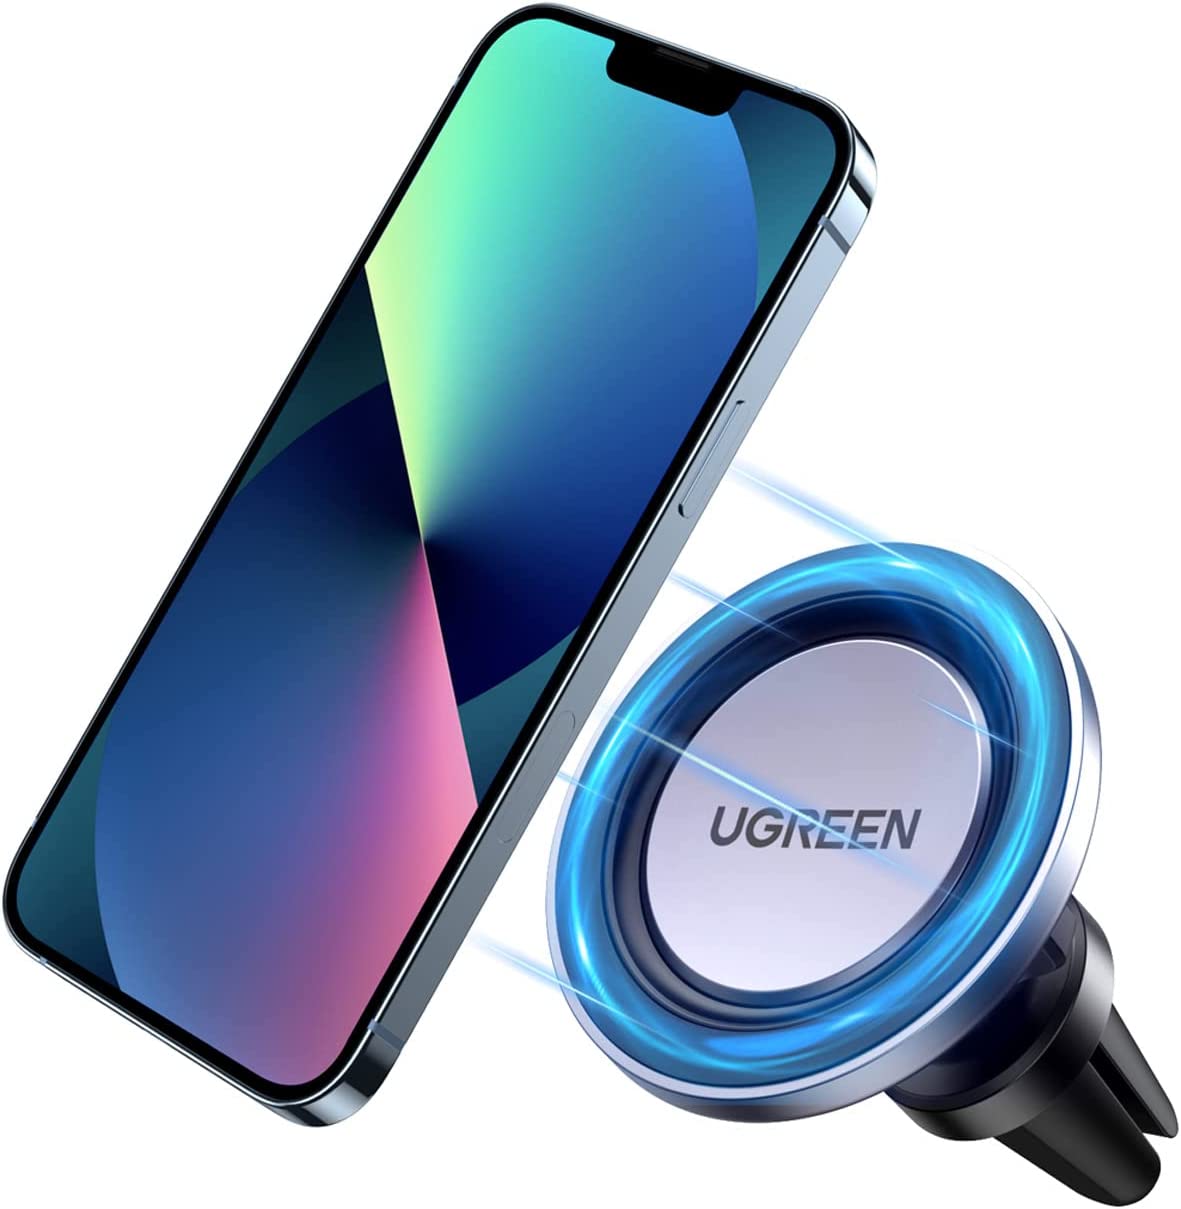 UGREEN MagSafe Magnetic Car Air Vent Phone Holder $17.49 & More + Free Shipping w/ Prime or on Orders $25+